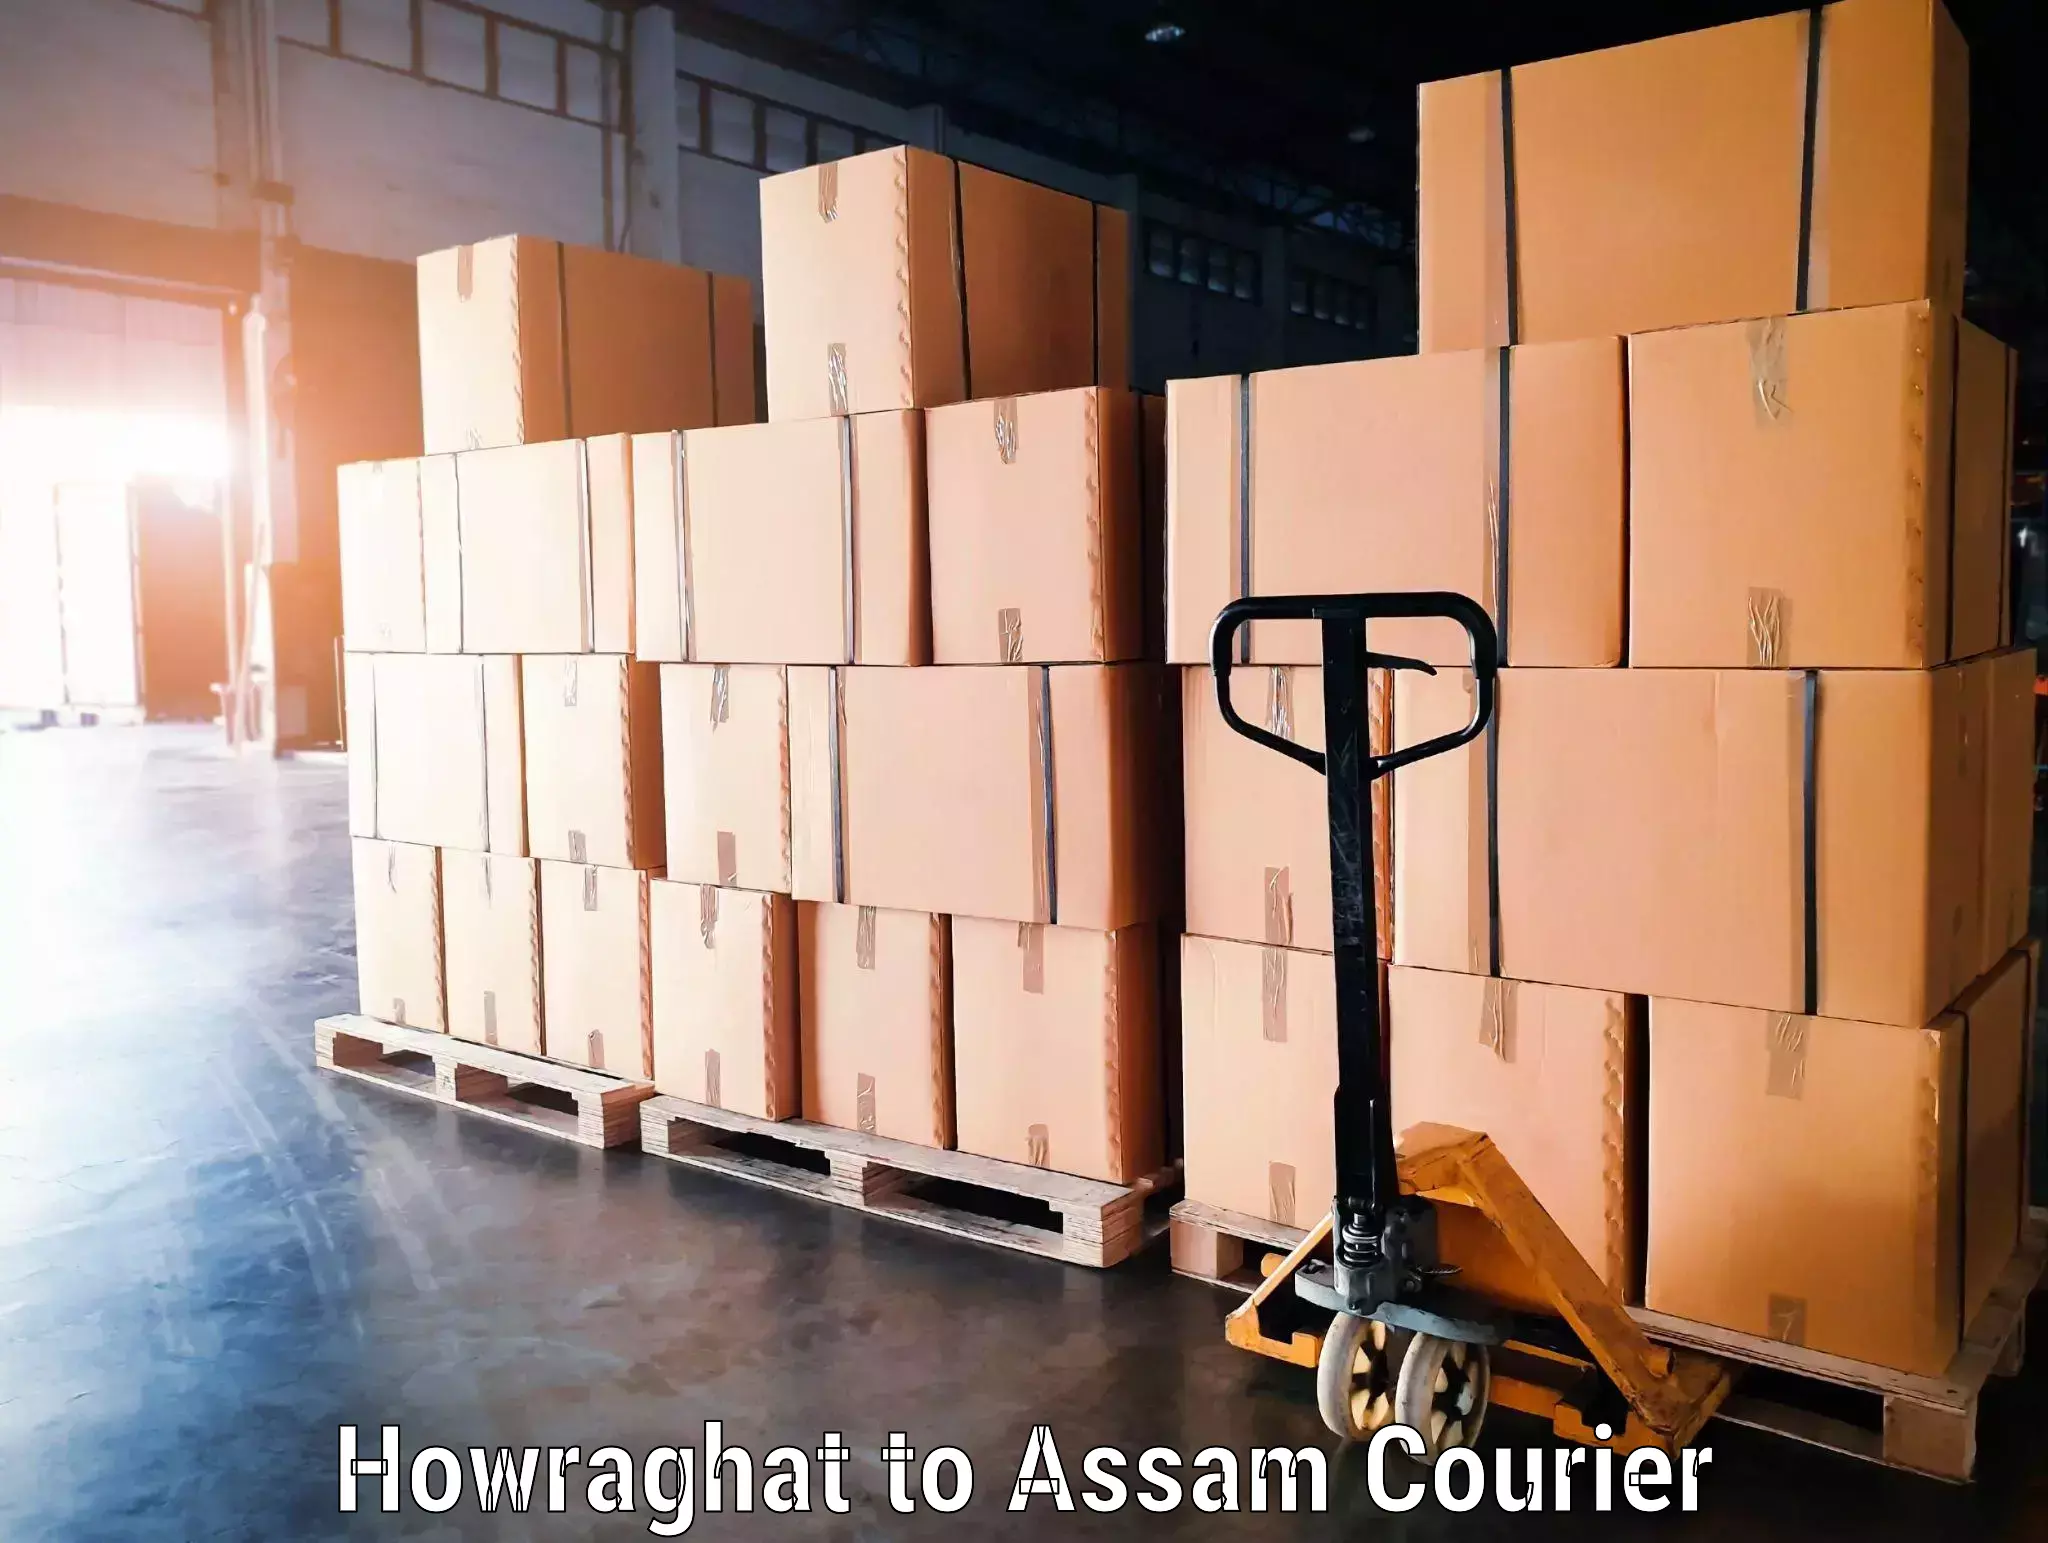 Heavy luggage shipping Howraghat to Sonitpur